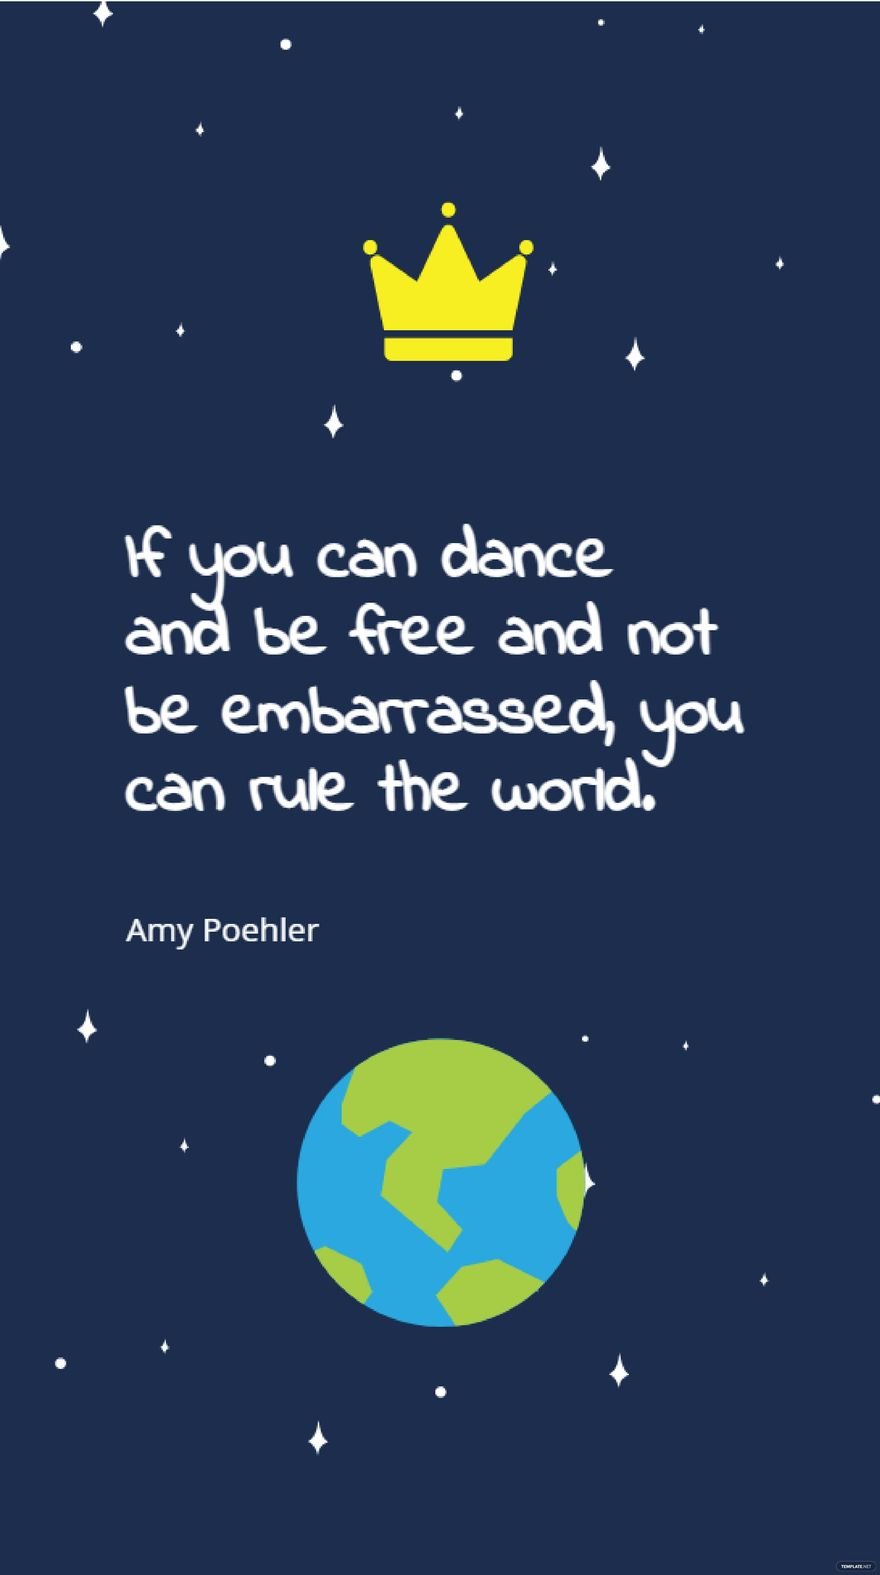 Amy Poehler - If you can dance and be free and not be embarrassed, you can rule the world.